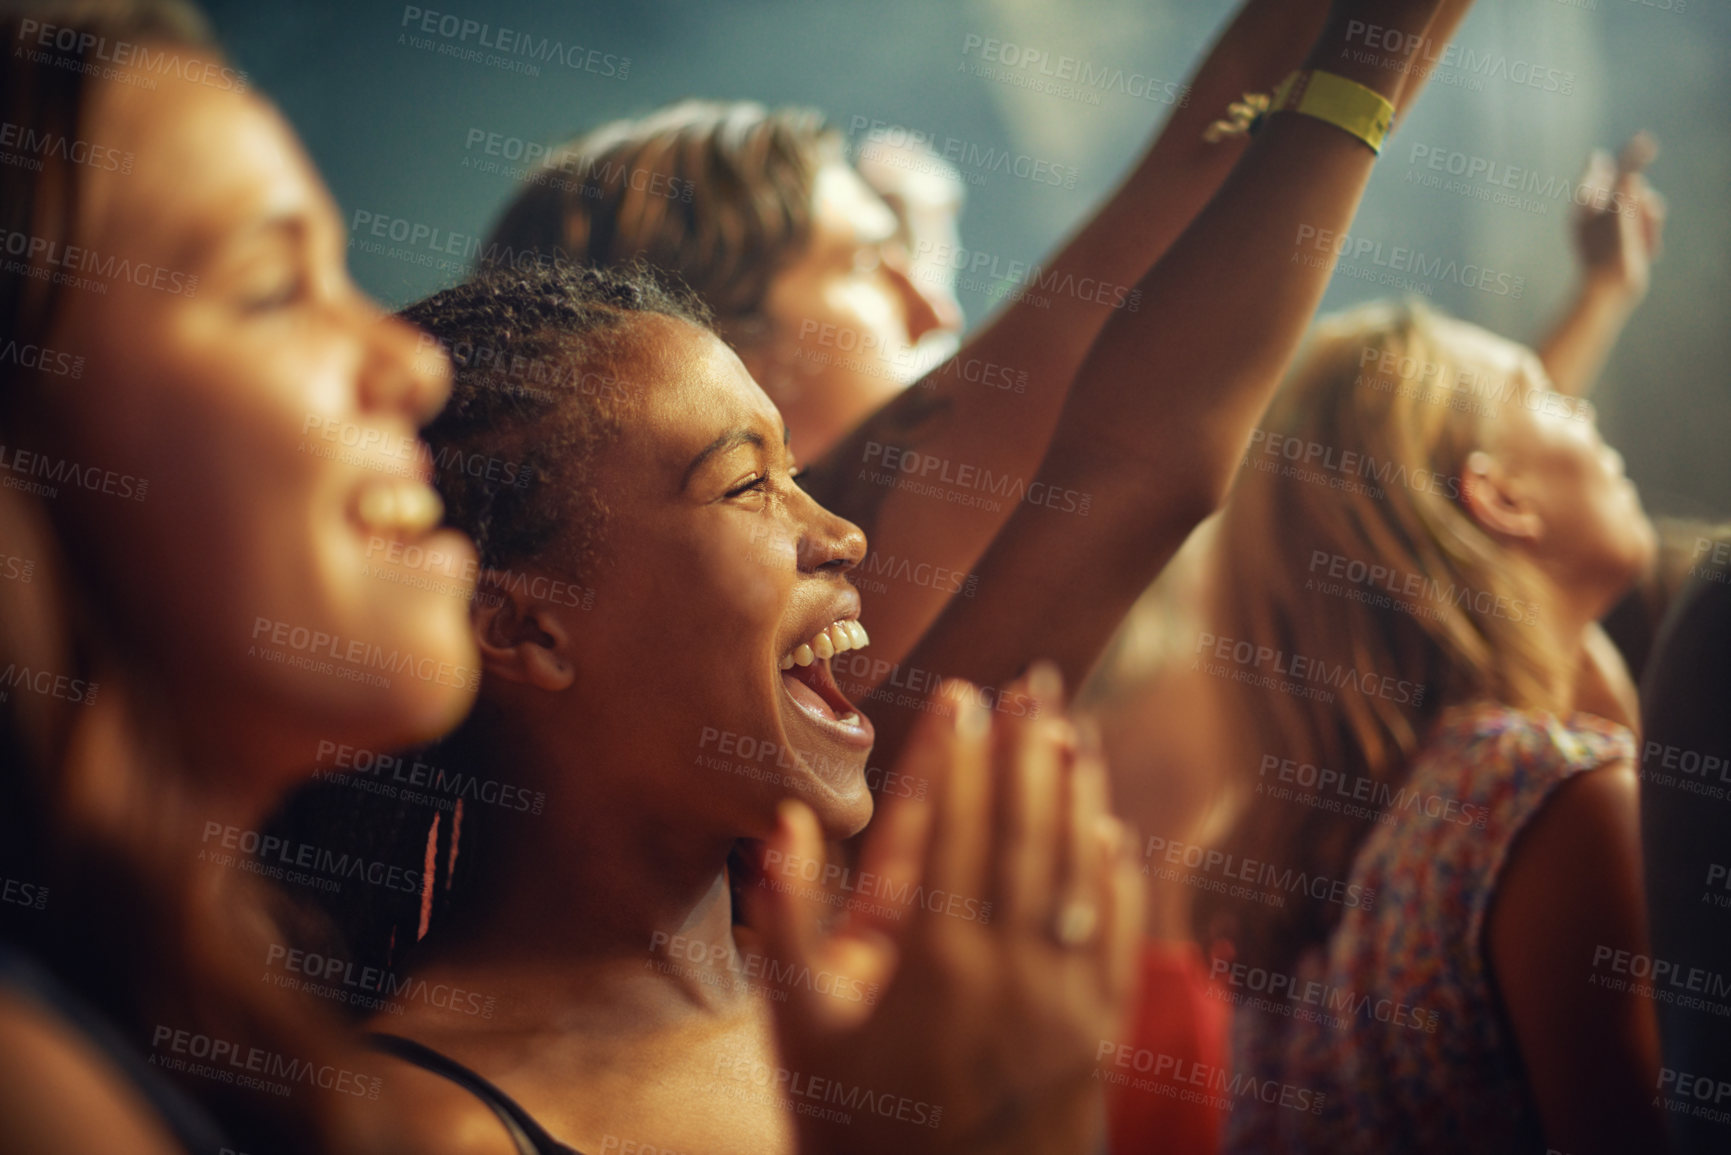 Buy stock photo Young girls in an audience enjoying their favourite band's performance